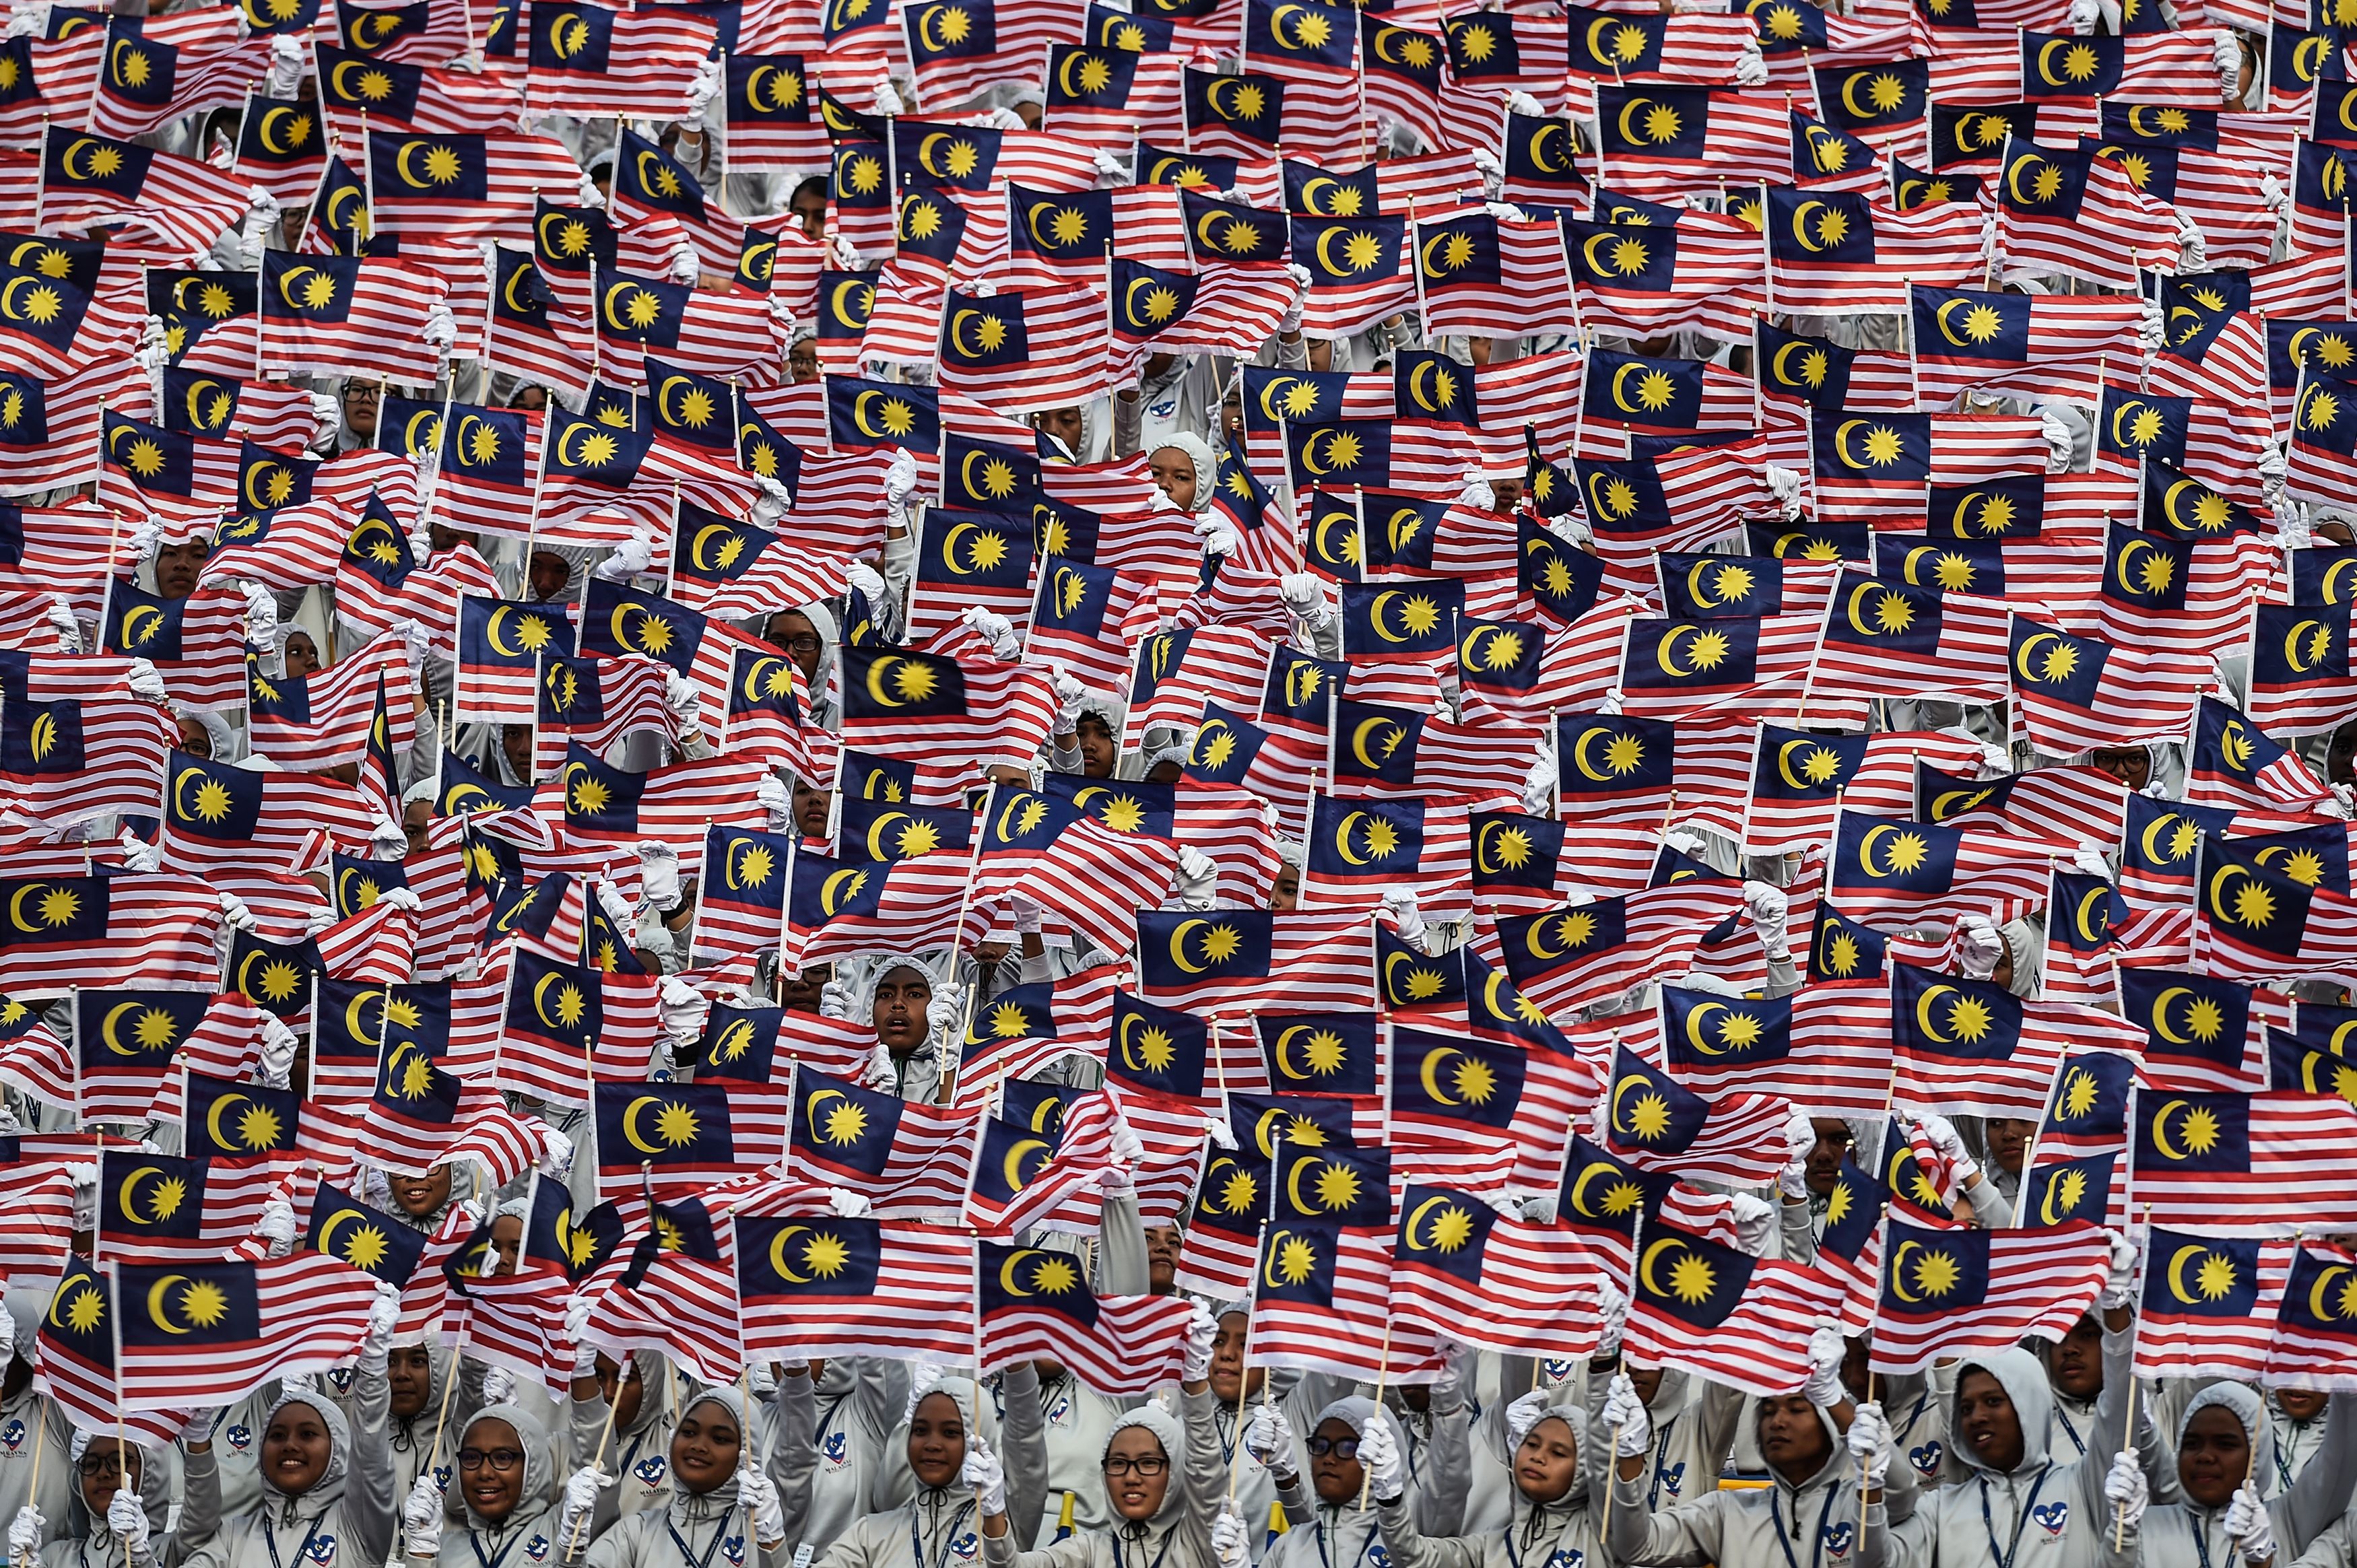 Malaysian schoolchildren wave national flags during the 59th National Day celebrations at Independence Square in Kuala Lumpur on August 31, 2016. (Mohd Rasfan—AFP/Getty Images)